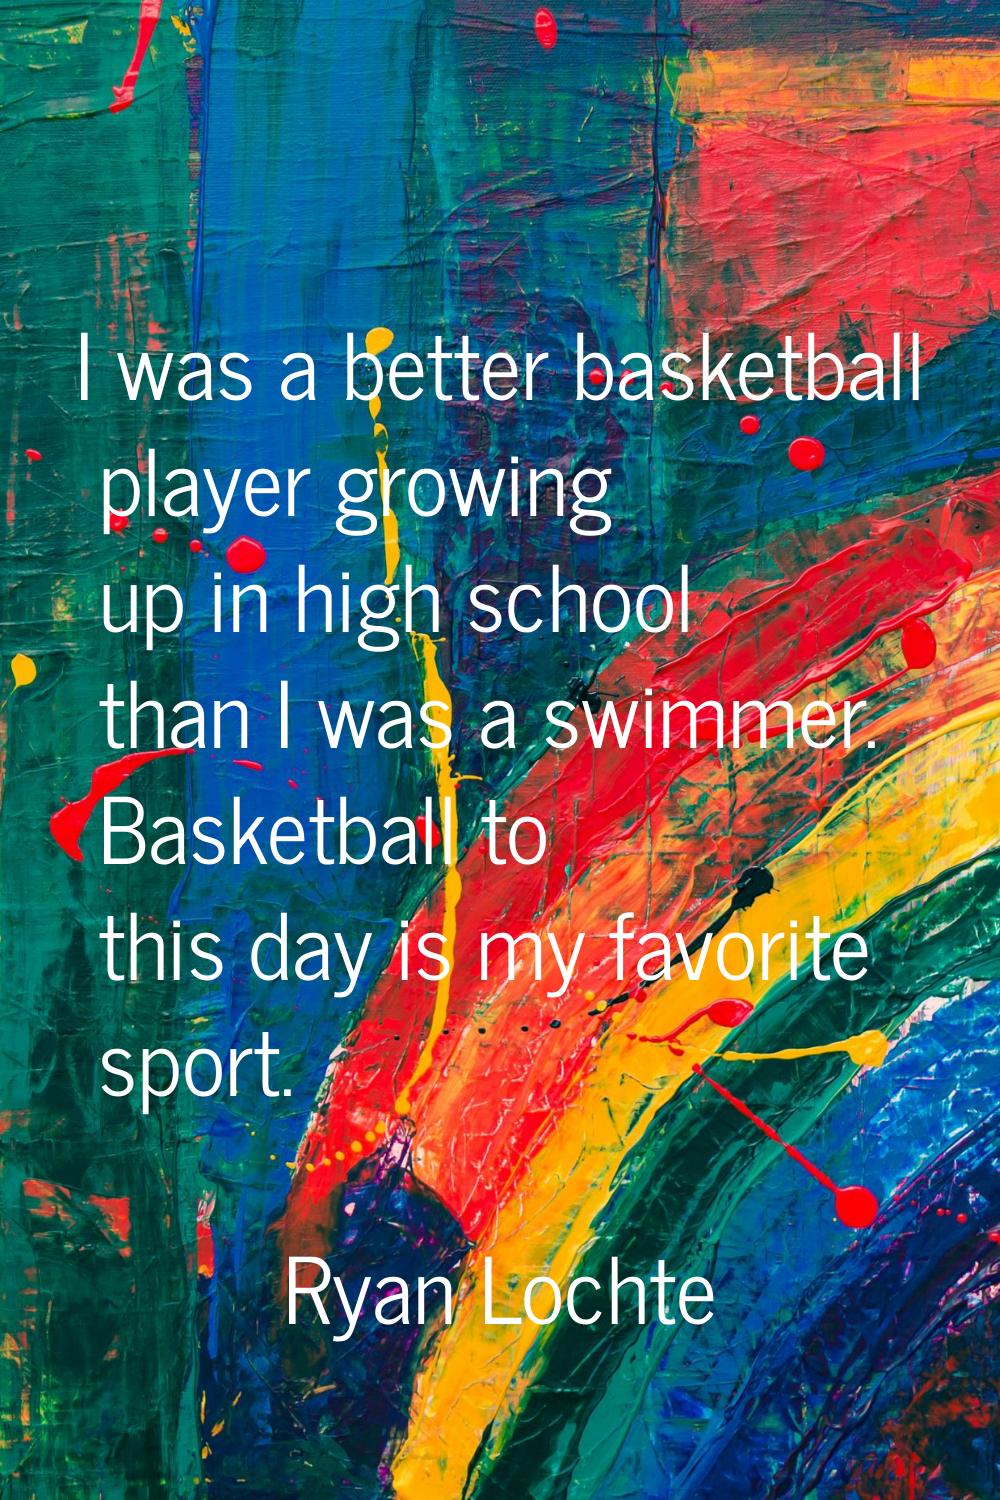 I was a better basketball player growing up in high school than I was a swimmer. Basketball to this